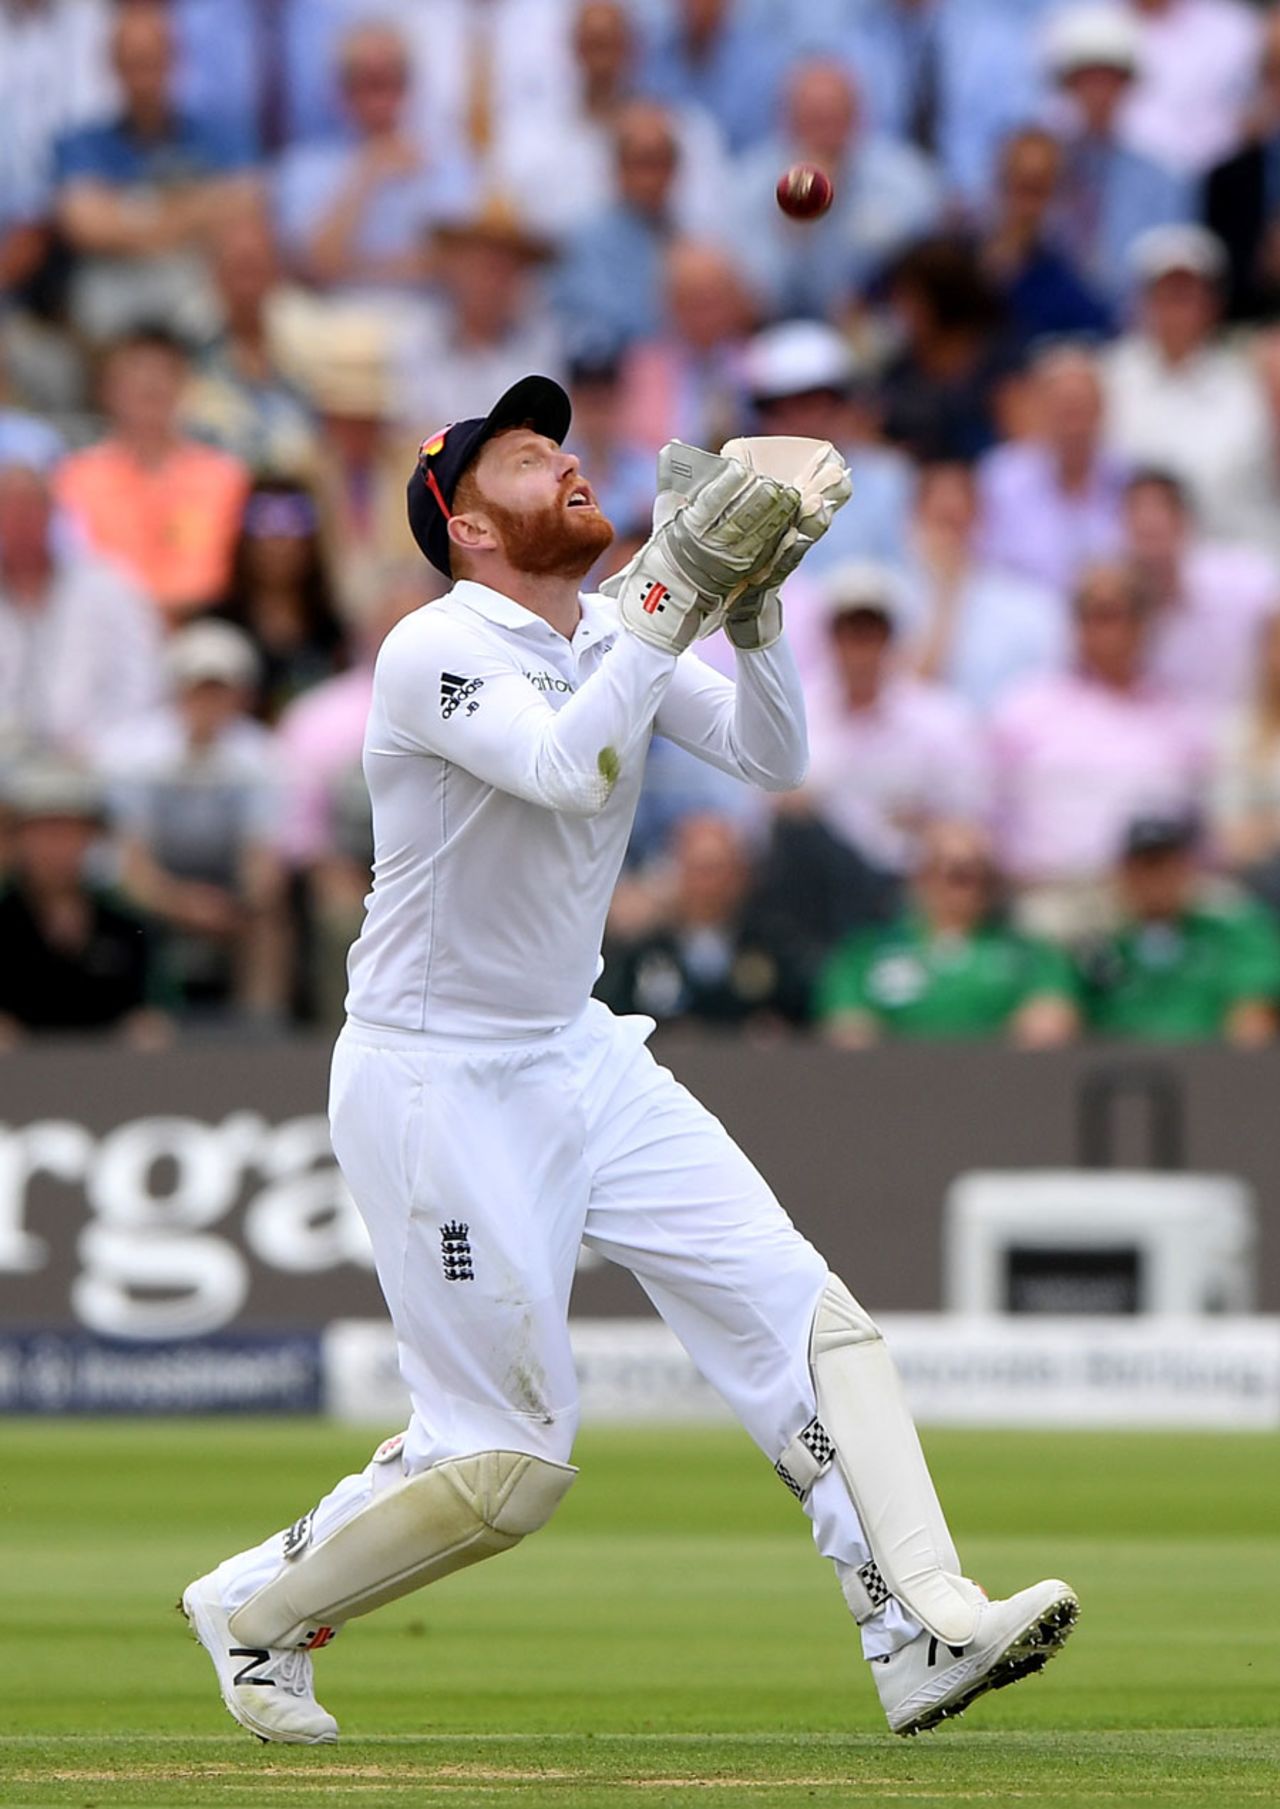 Jonny Bairstow steadies himself under a catch, England v Pakistan, 1st Investec Test, Lord's, 1st day, July 14, 2016